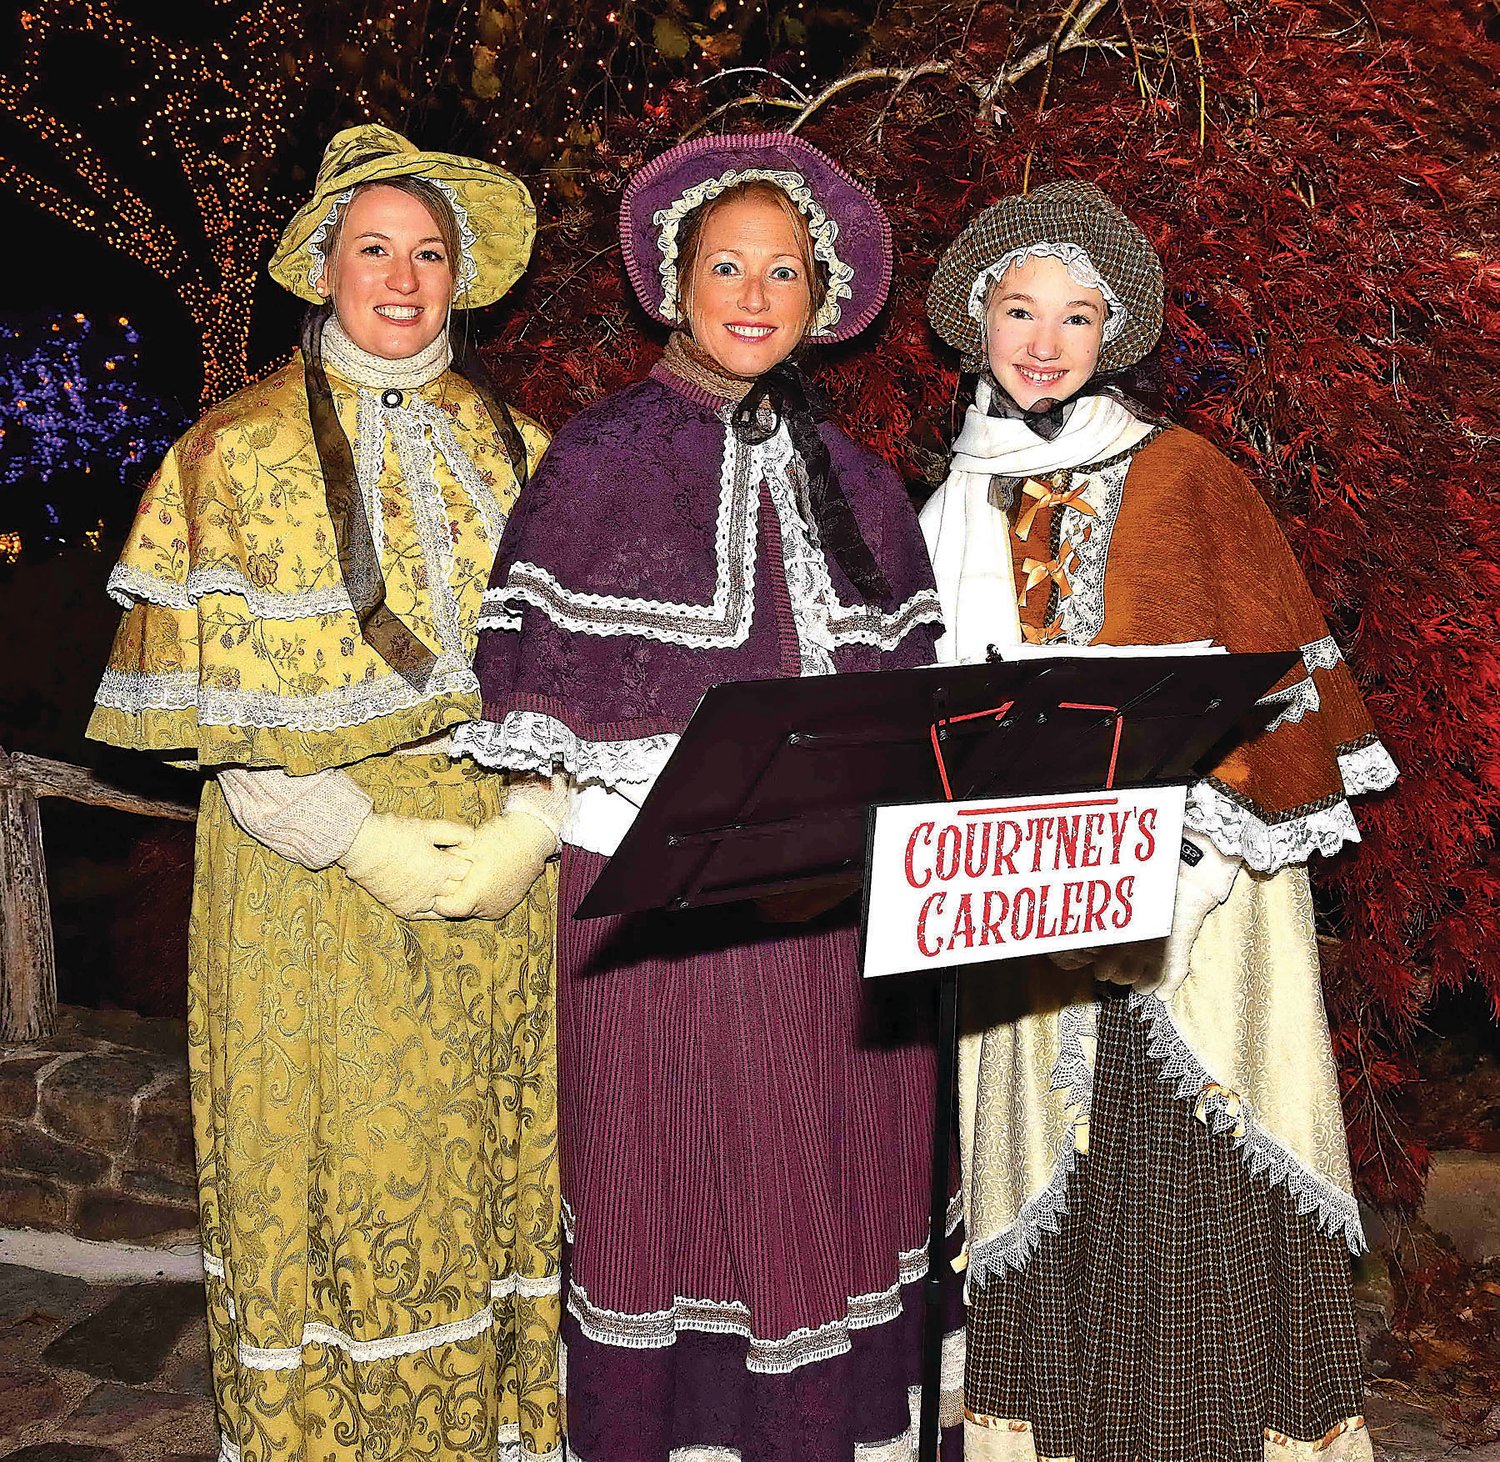 Courtney’s Carolers entertained guests with holiday songs.